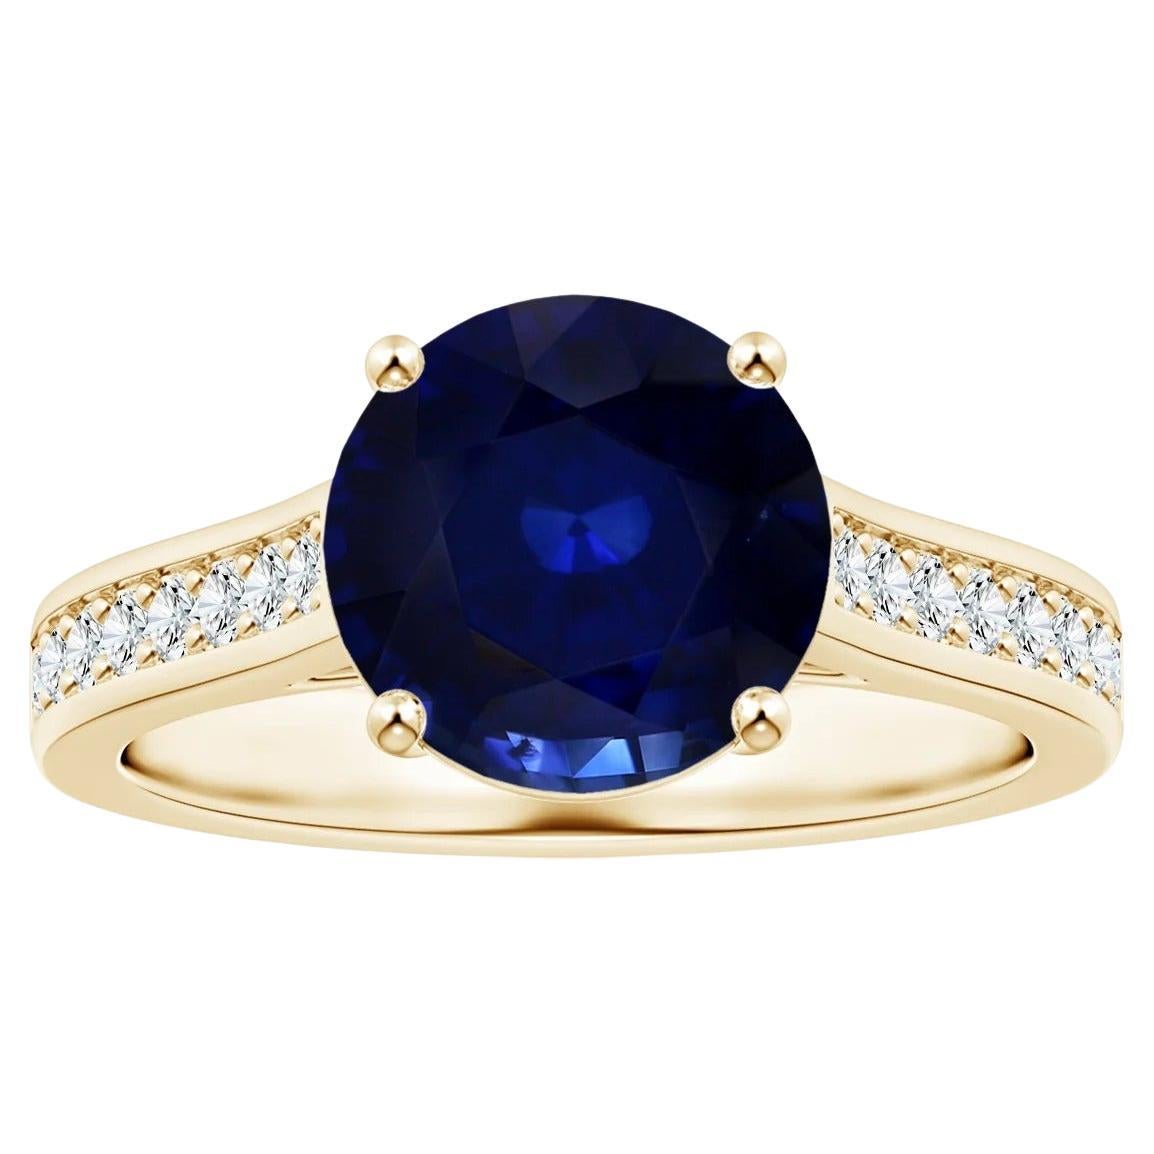 For Sale:  Angara Gia Certified Natural Blue Sapphire Ring in Yellow Gold with Diamonds